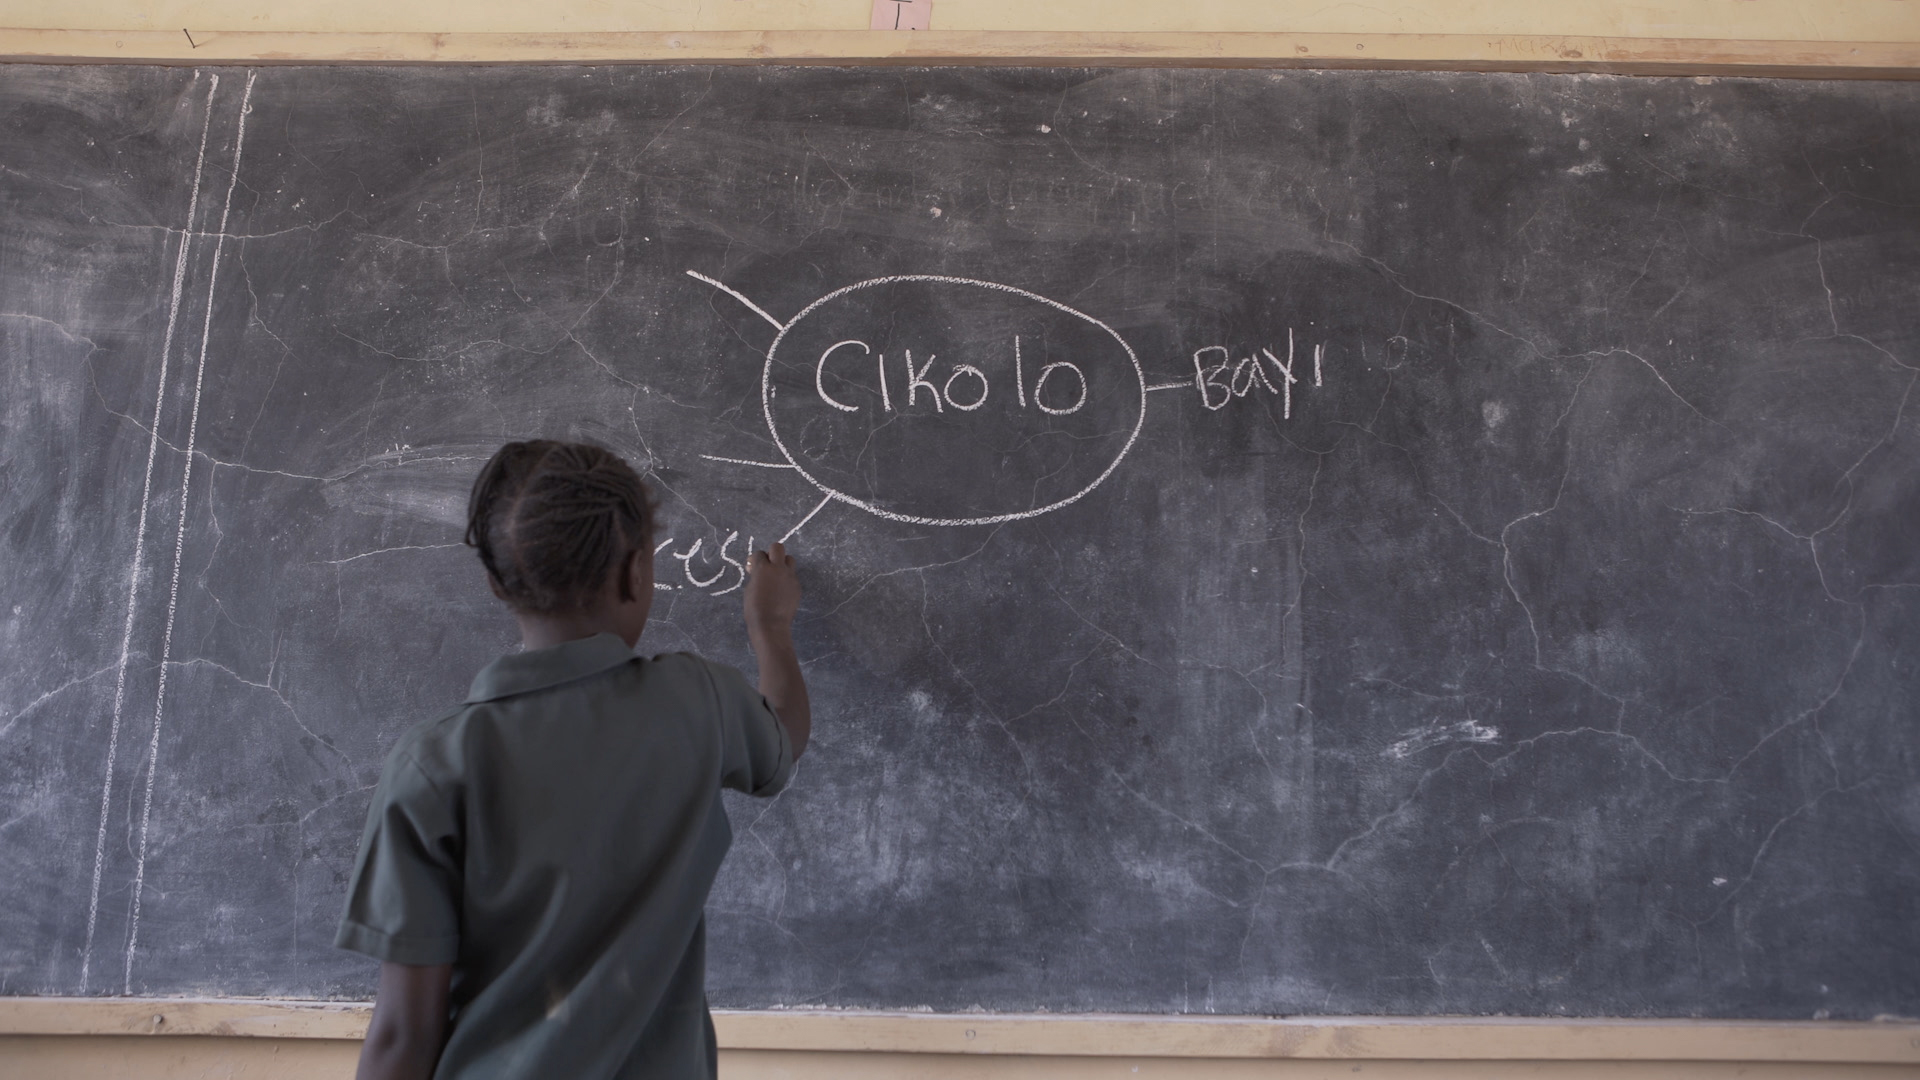 A child stands at the board, writing the word "cesu" in chalk on a mind map during a TaRL reading class in Zambia. On the board, the word "cikolo" is circled, with lines to "bayi" and "cesu".